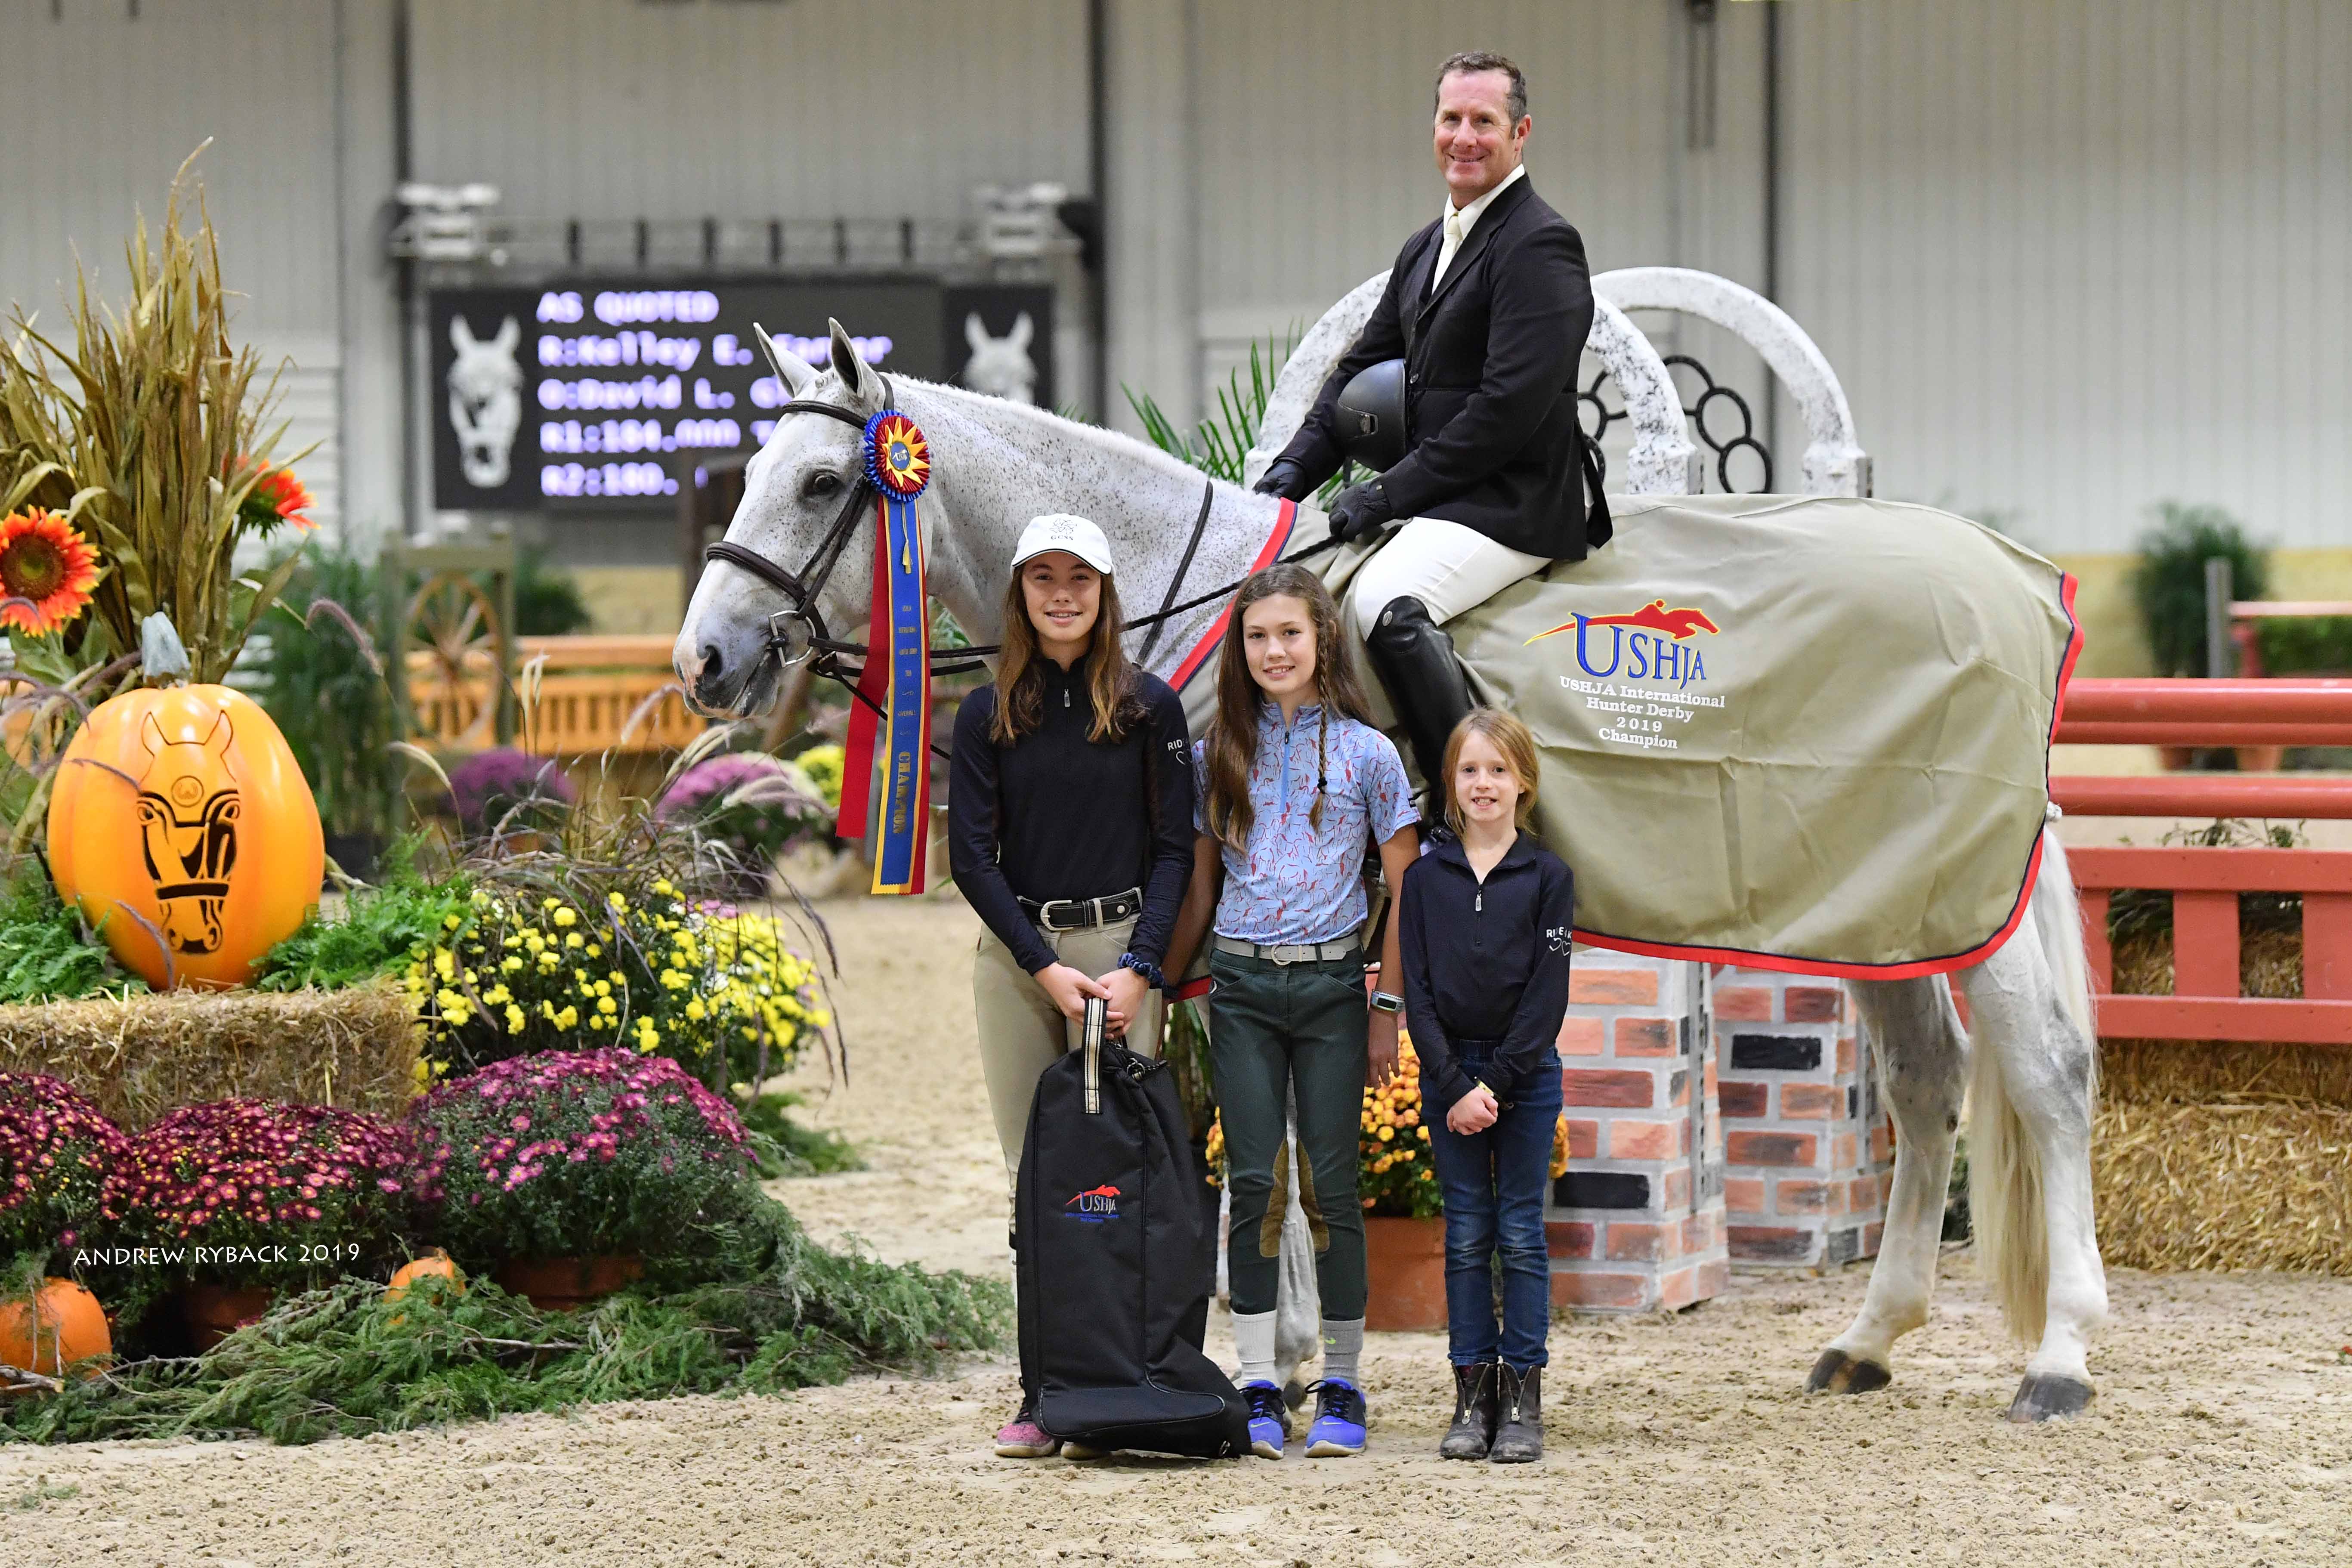 in Crolick Center - Z International and Derby Corallo Greg Equestrian $40,000 the World Top USHJA Hunter Take Honors